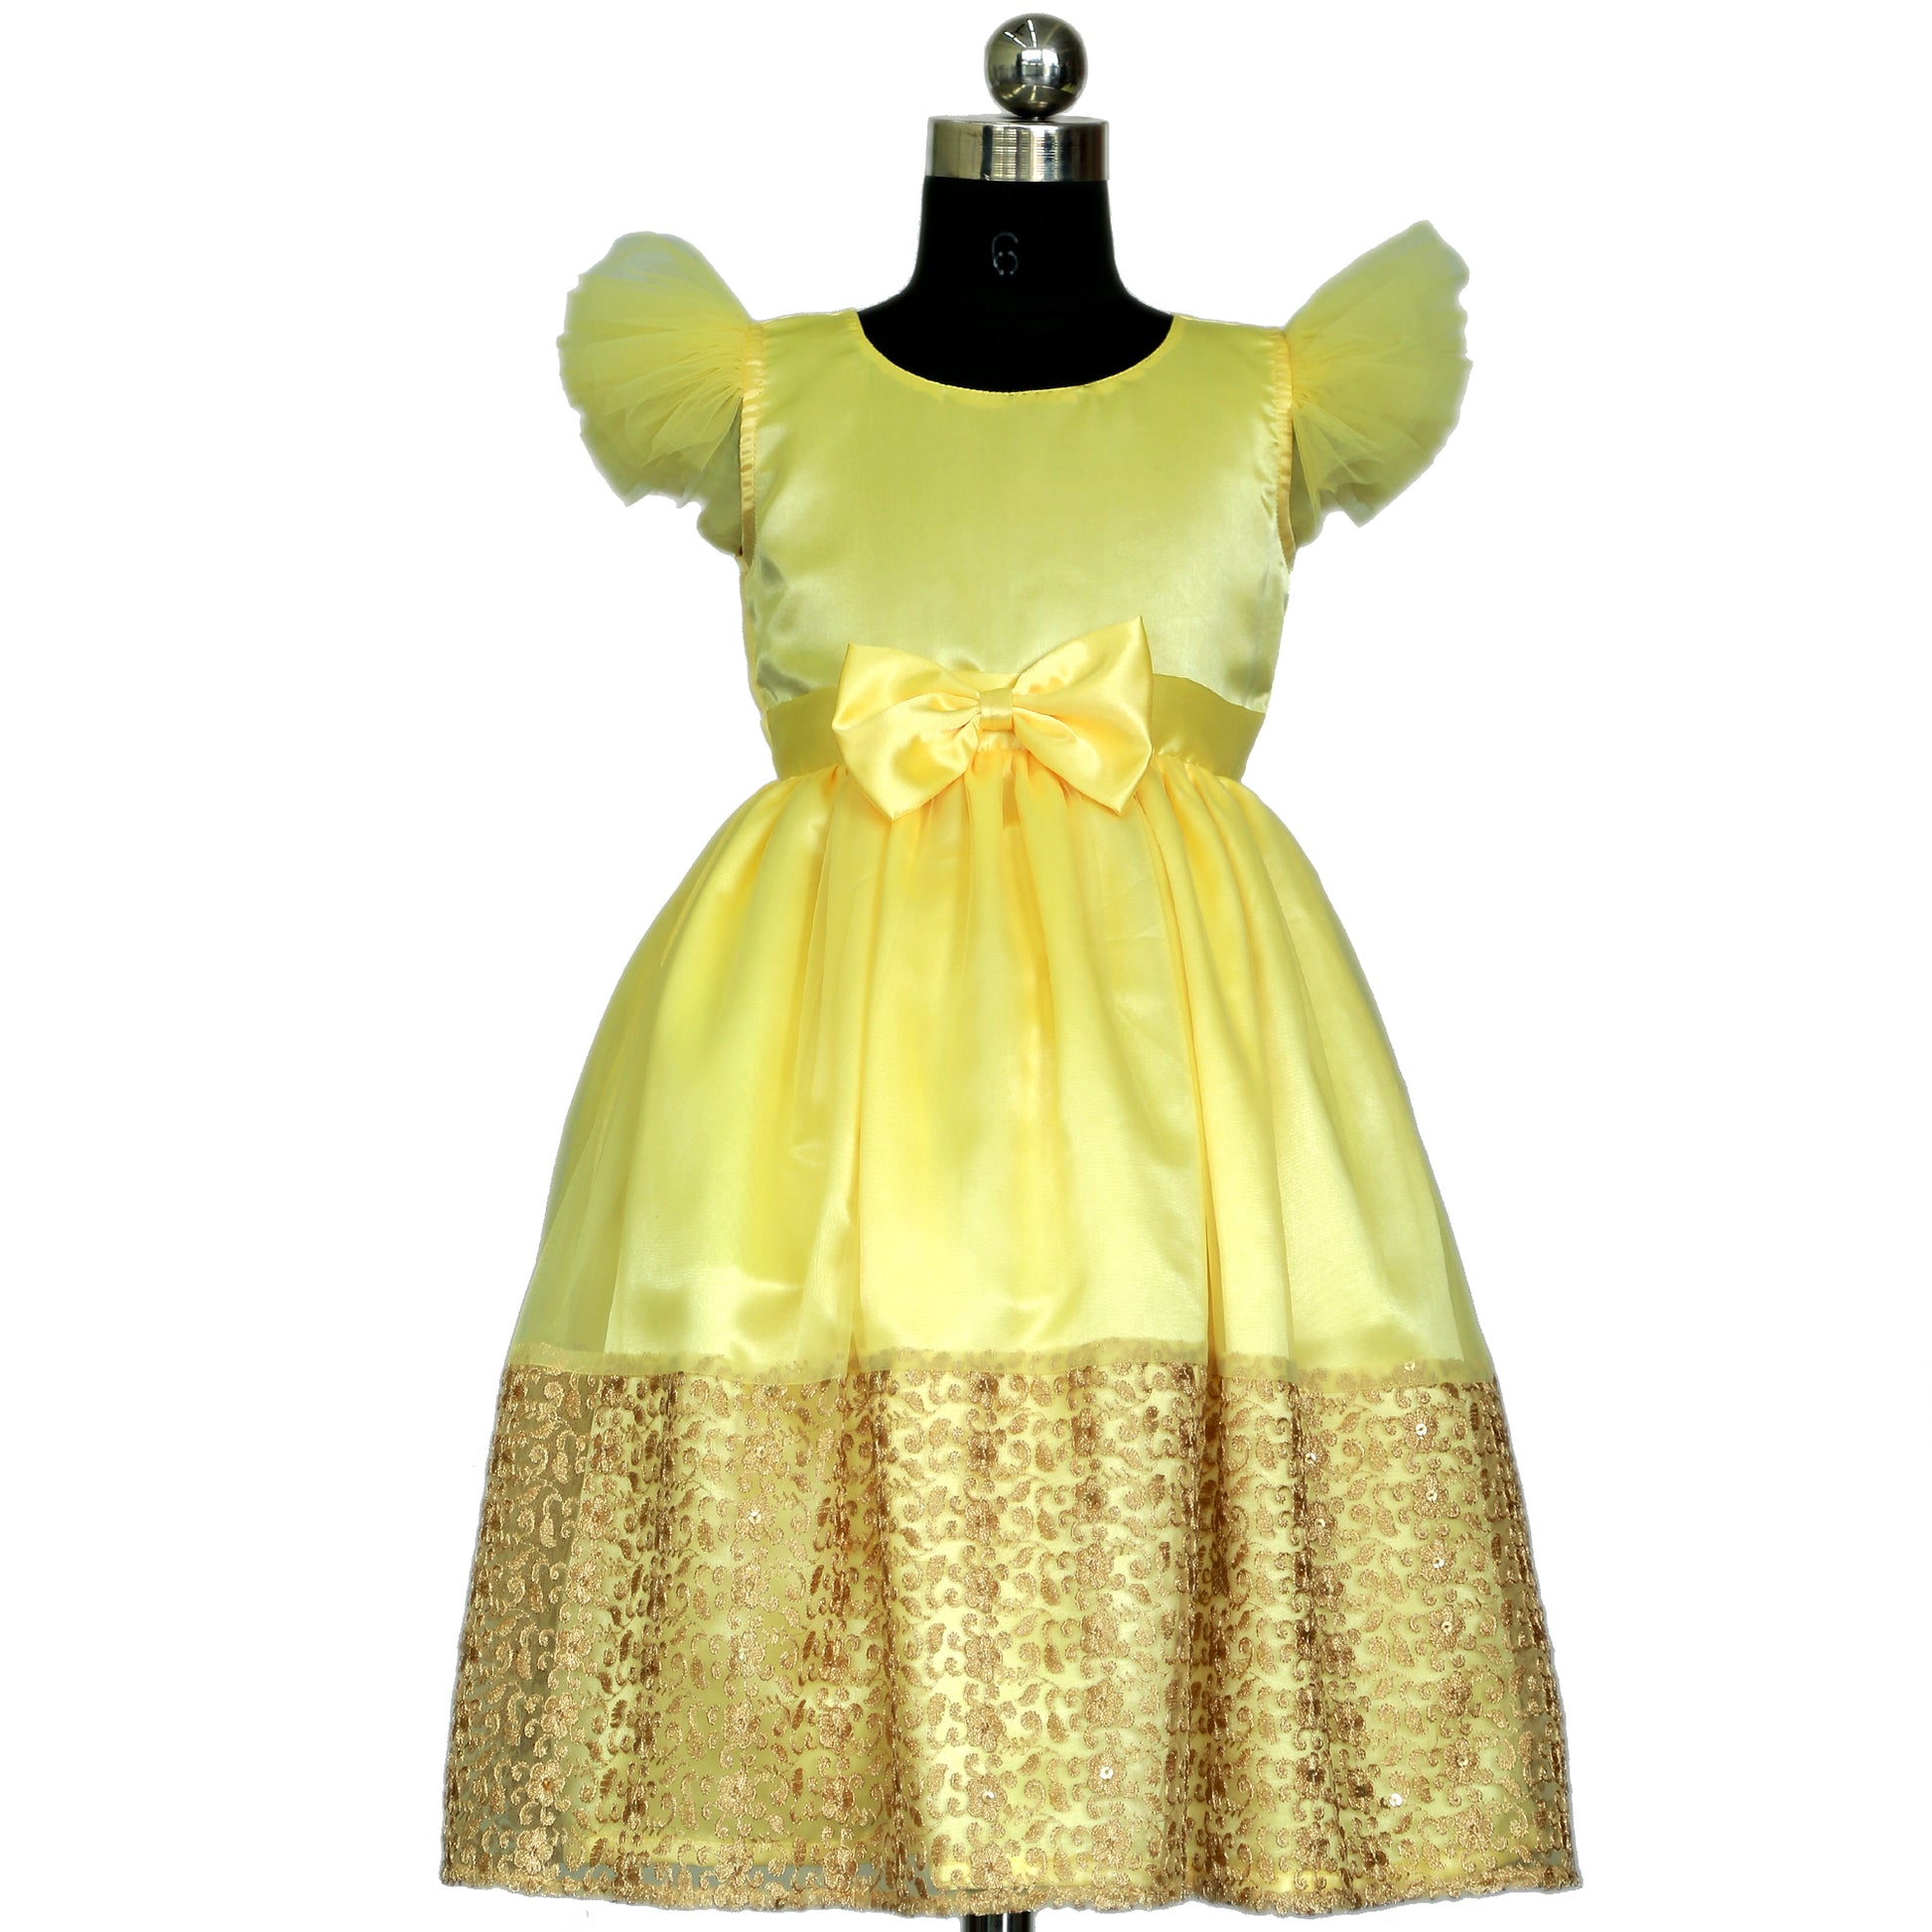 heykidoo unique designer frock party dress for small girls